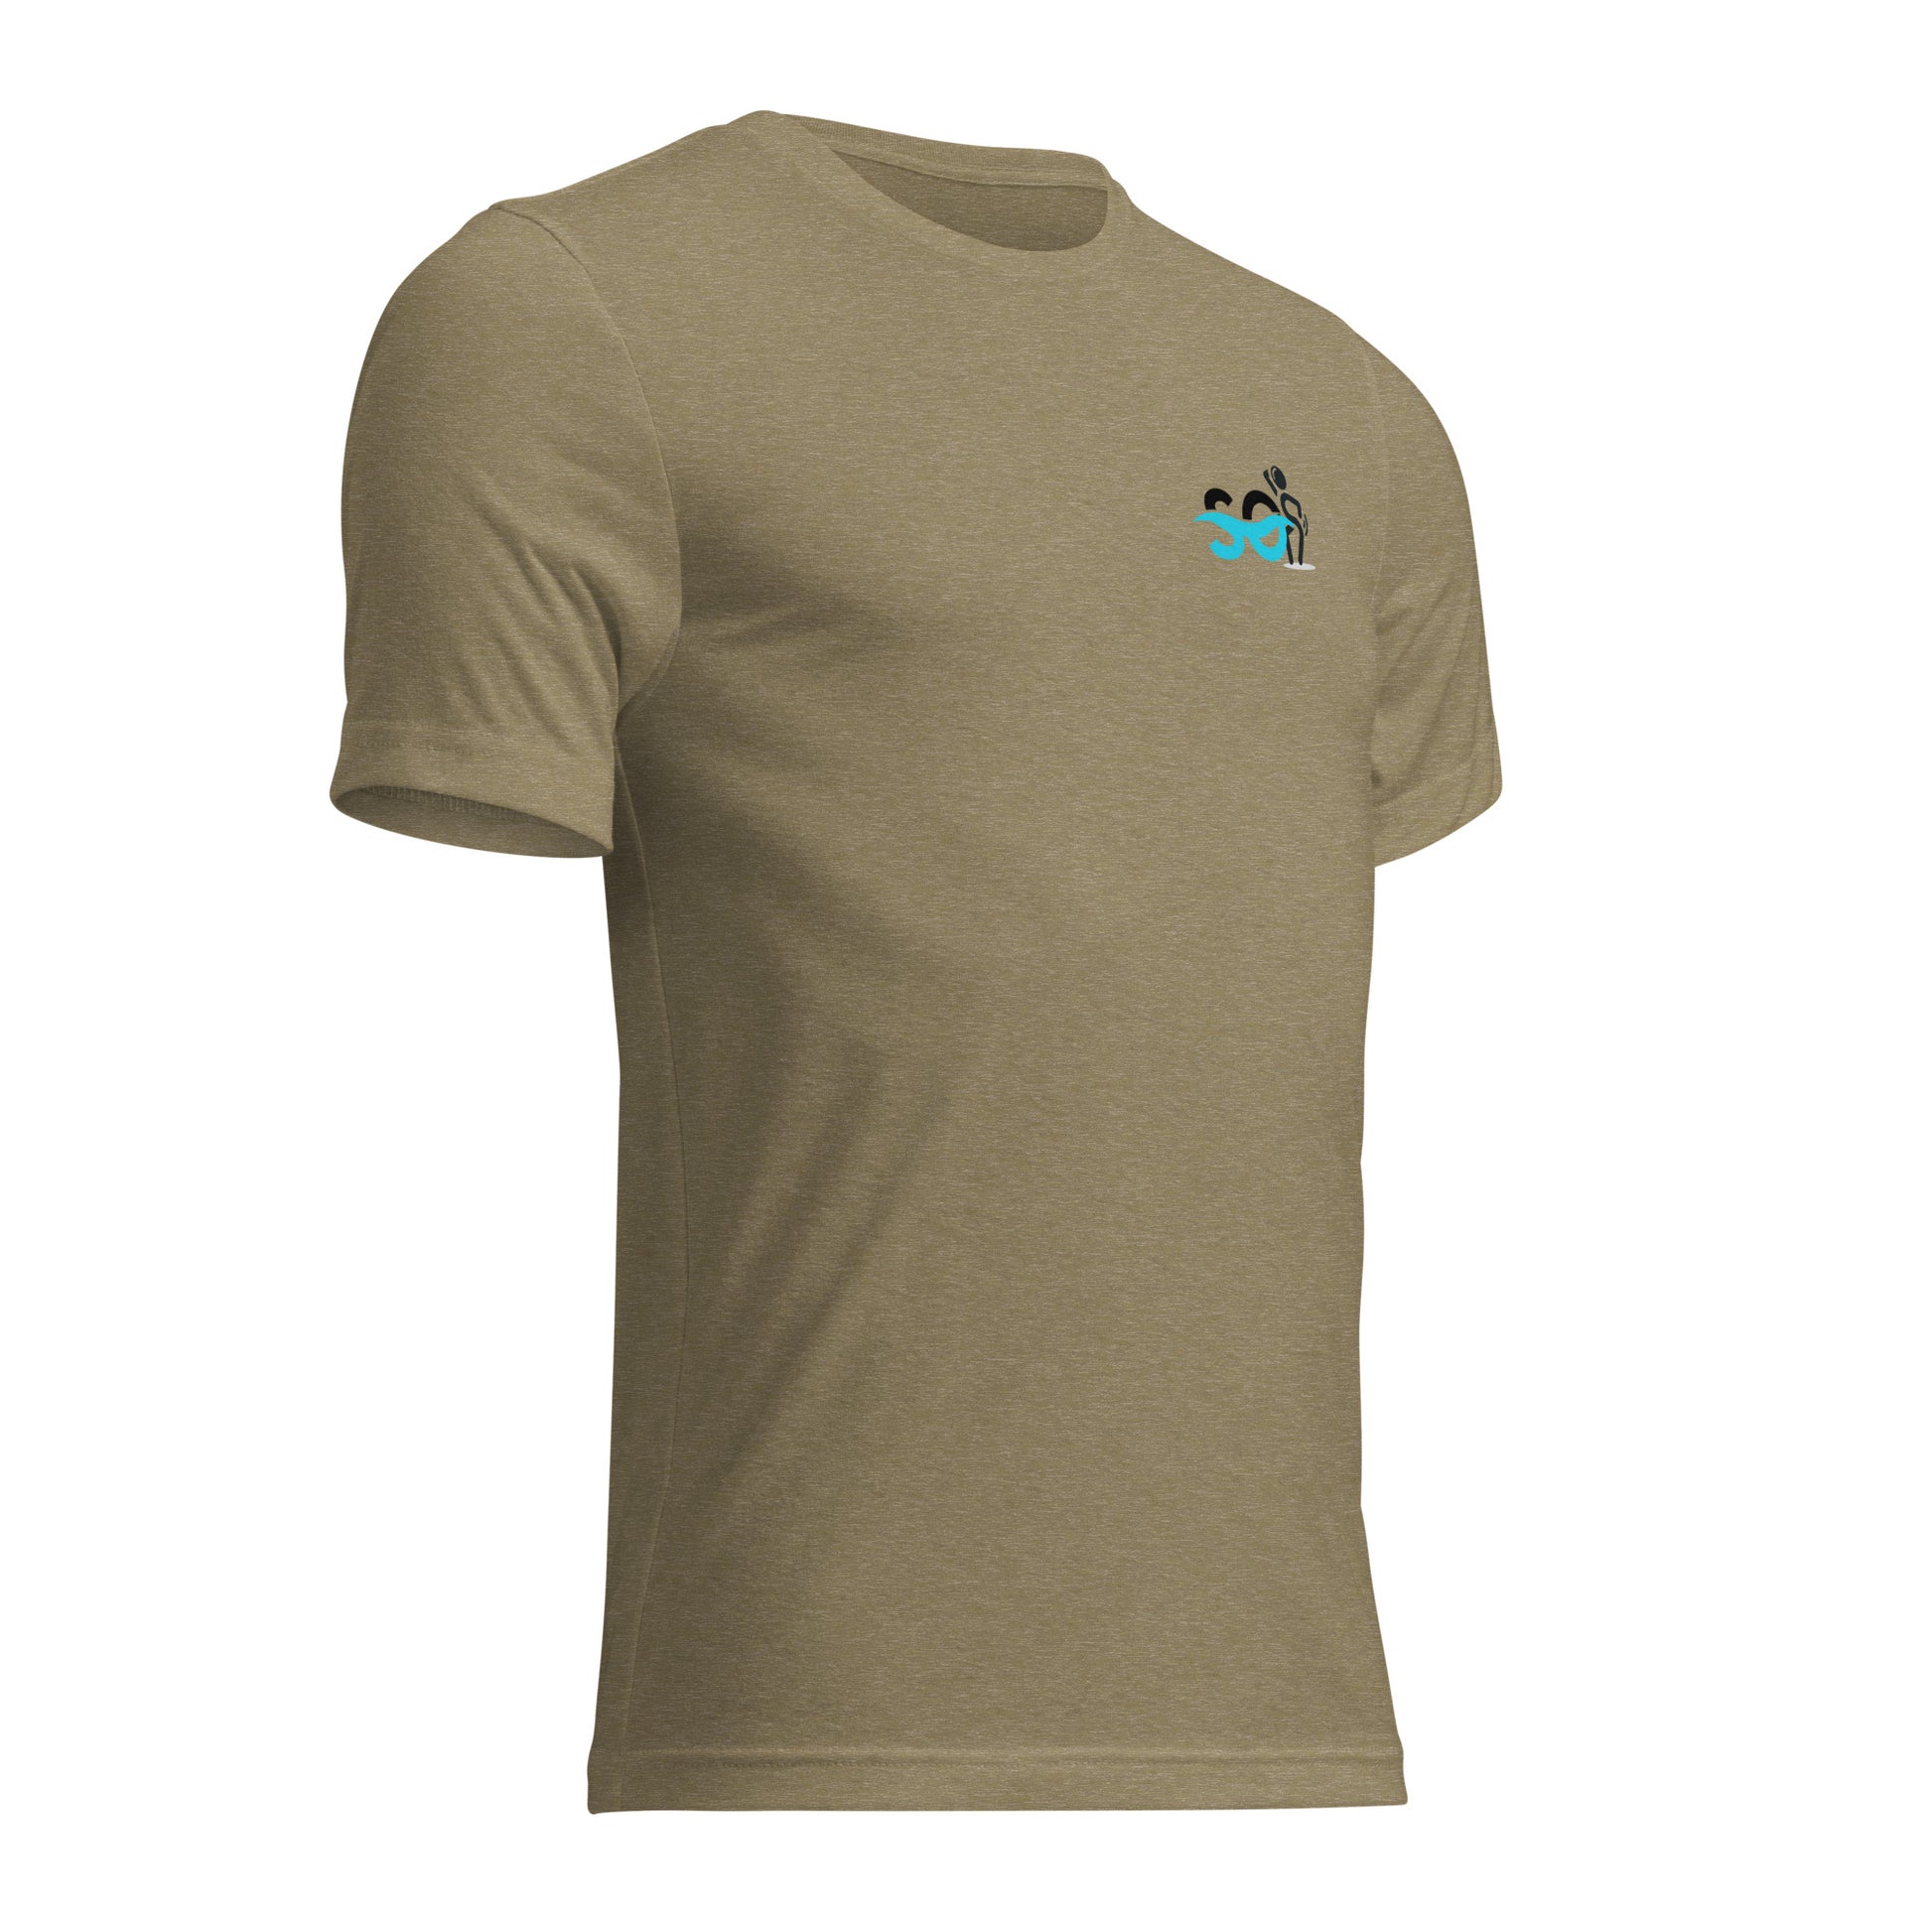 a tan t - shirt with a picture of a bird on it